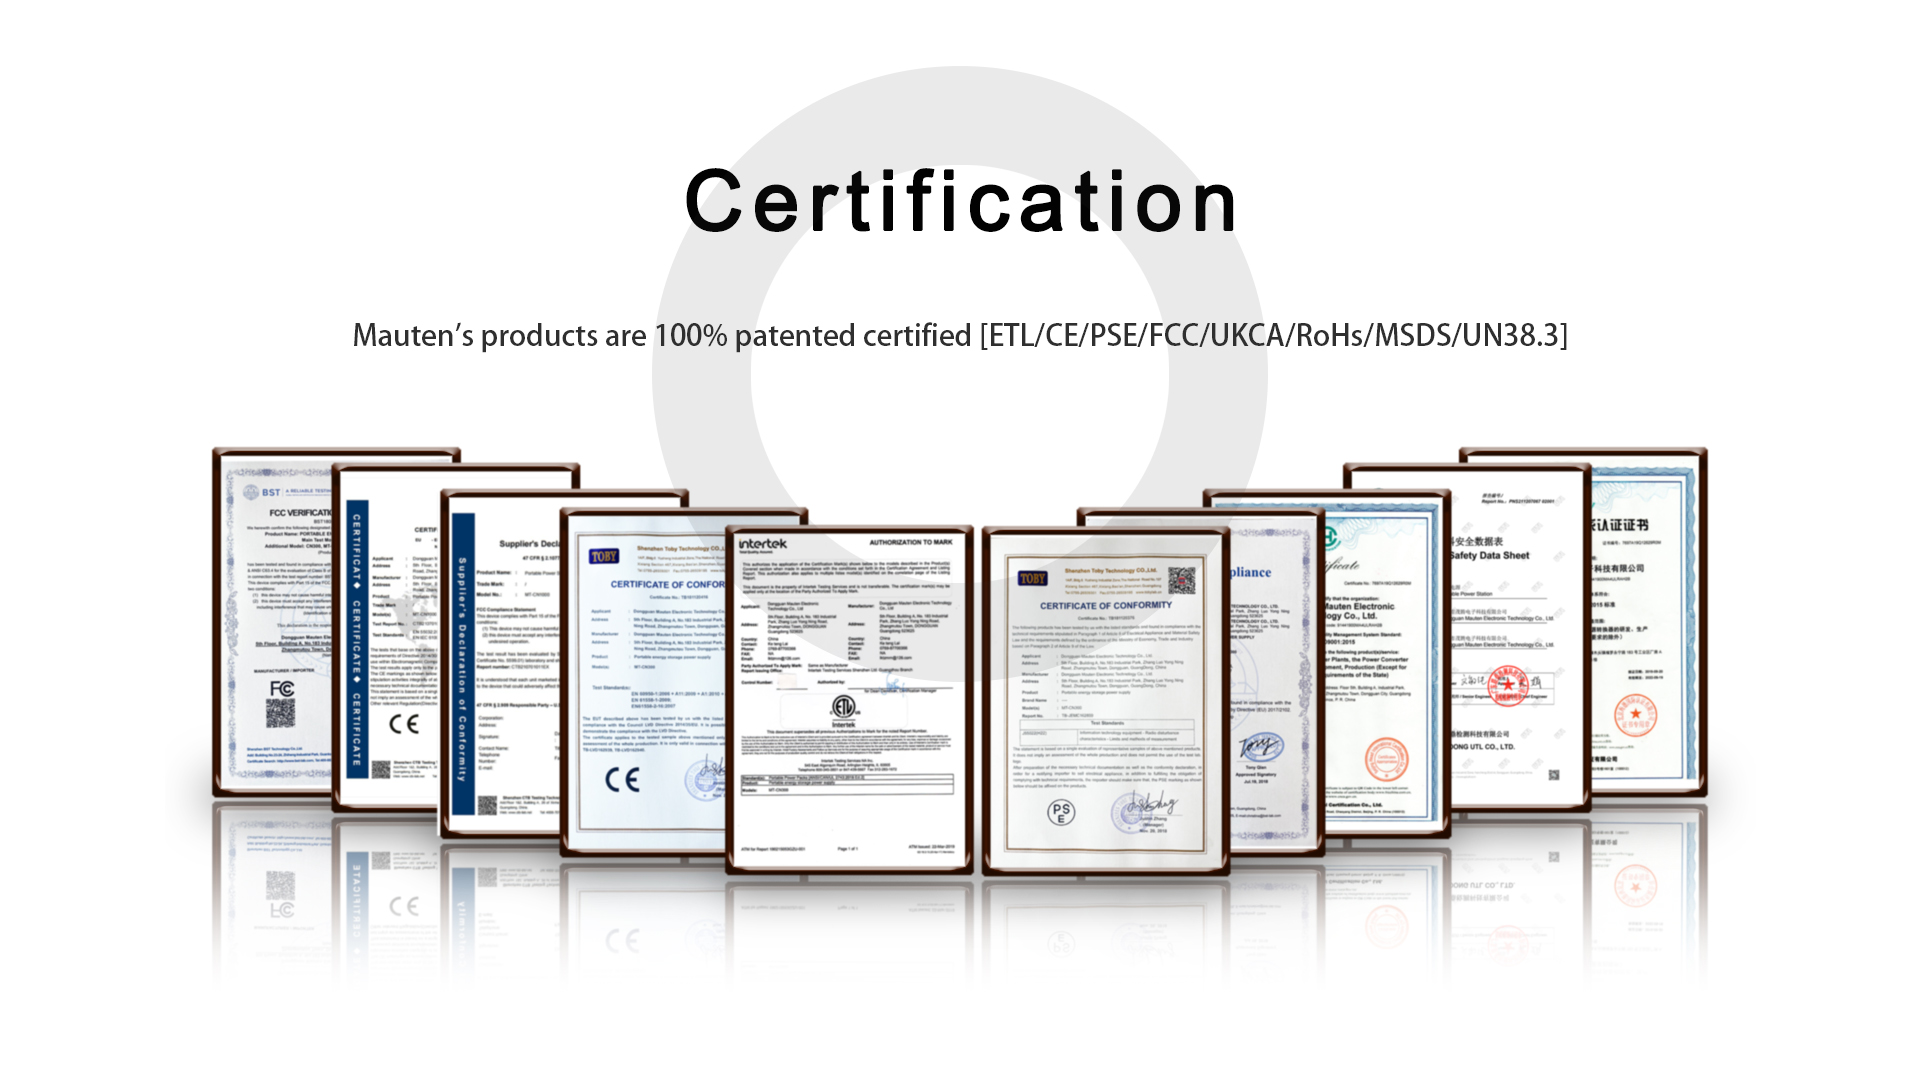 Mauten certificates and patents